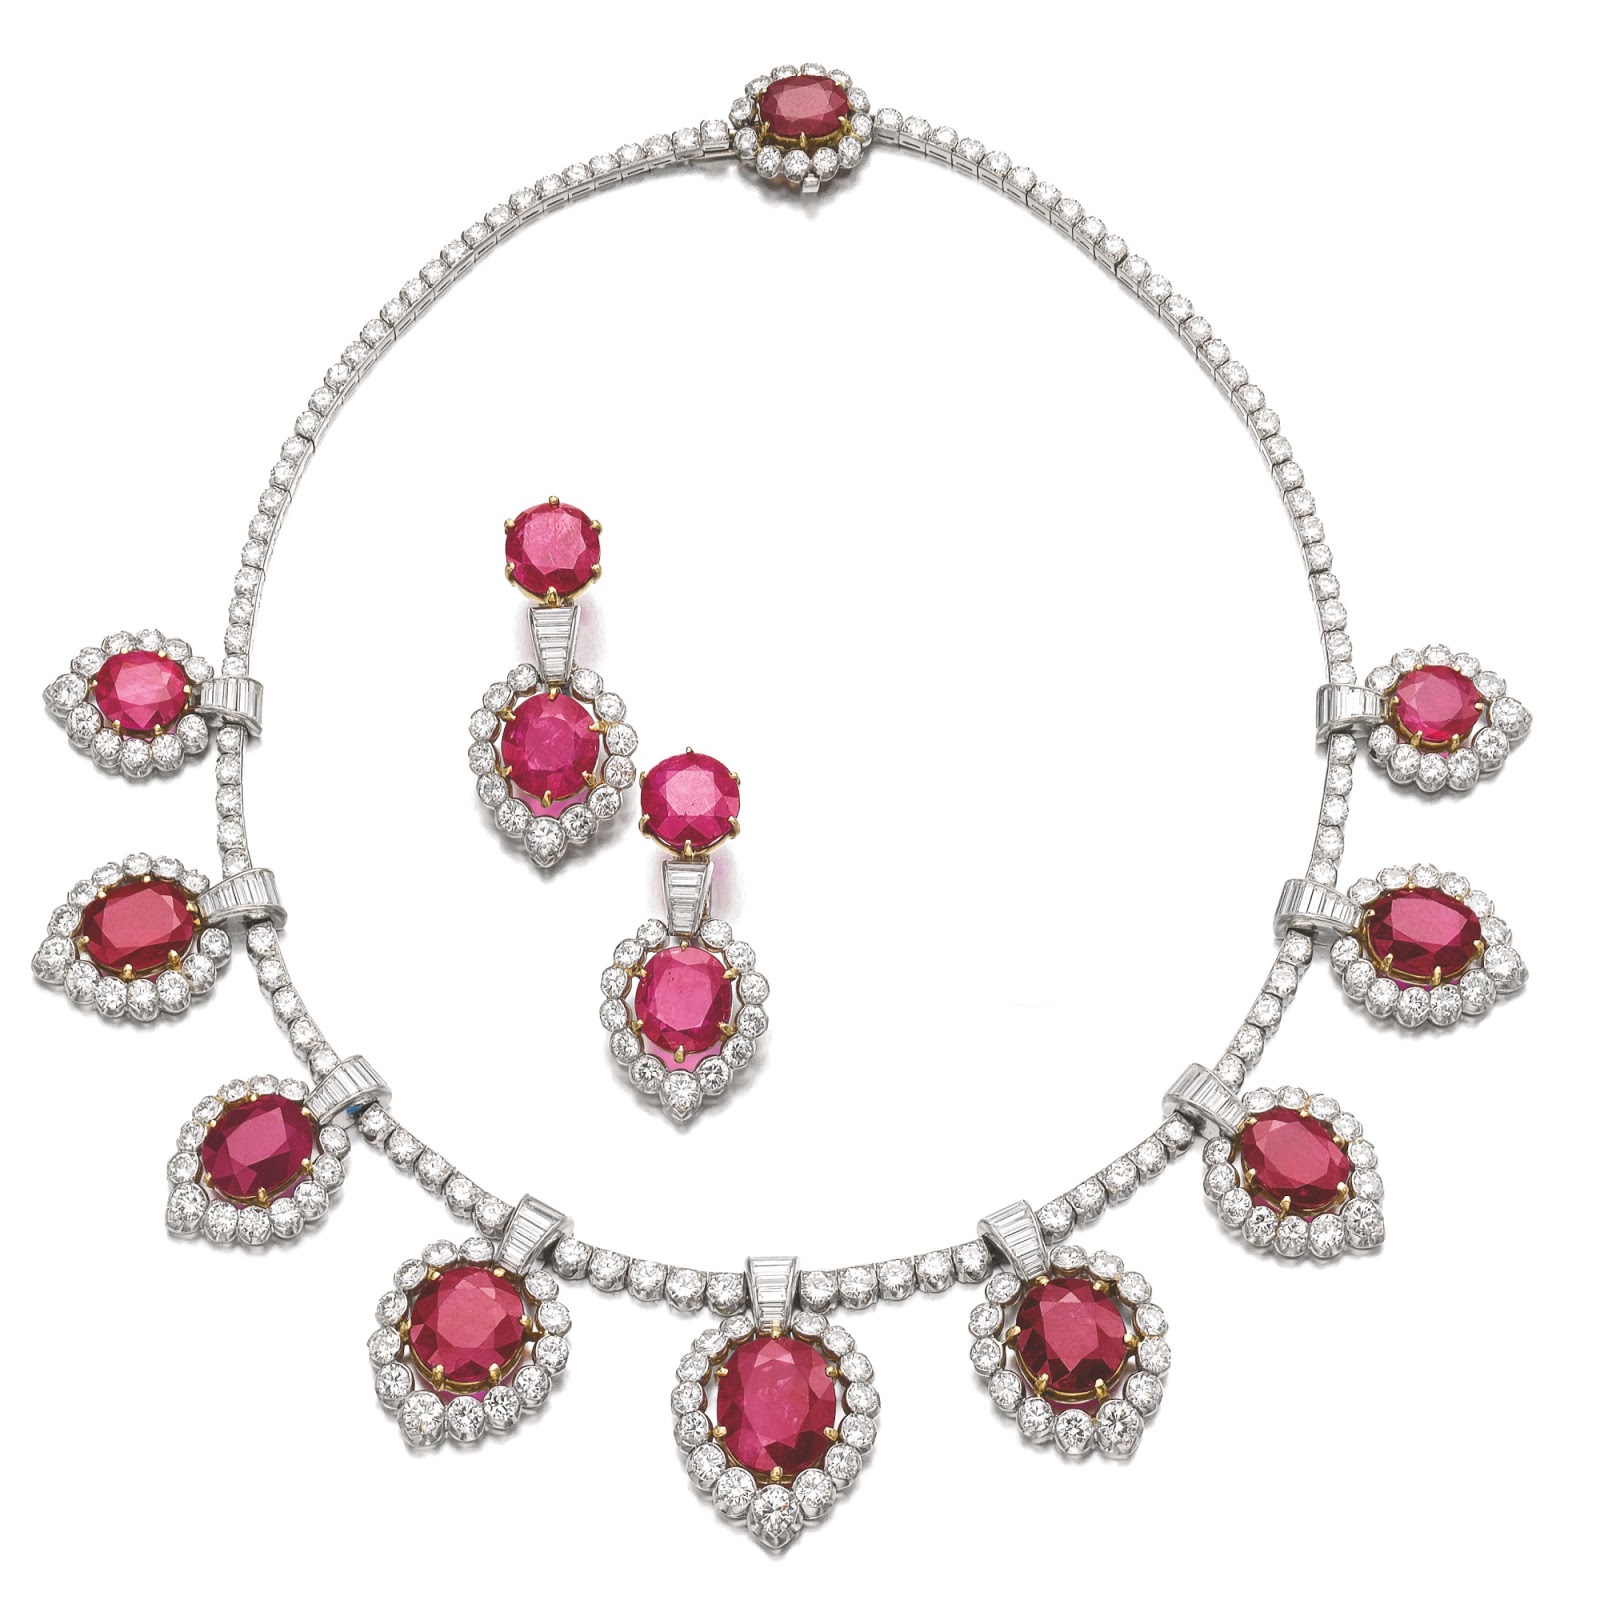 Marie Poutine's Jewels & Royals: Demi-Parures in Pink